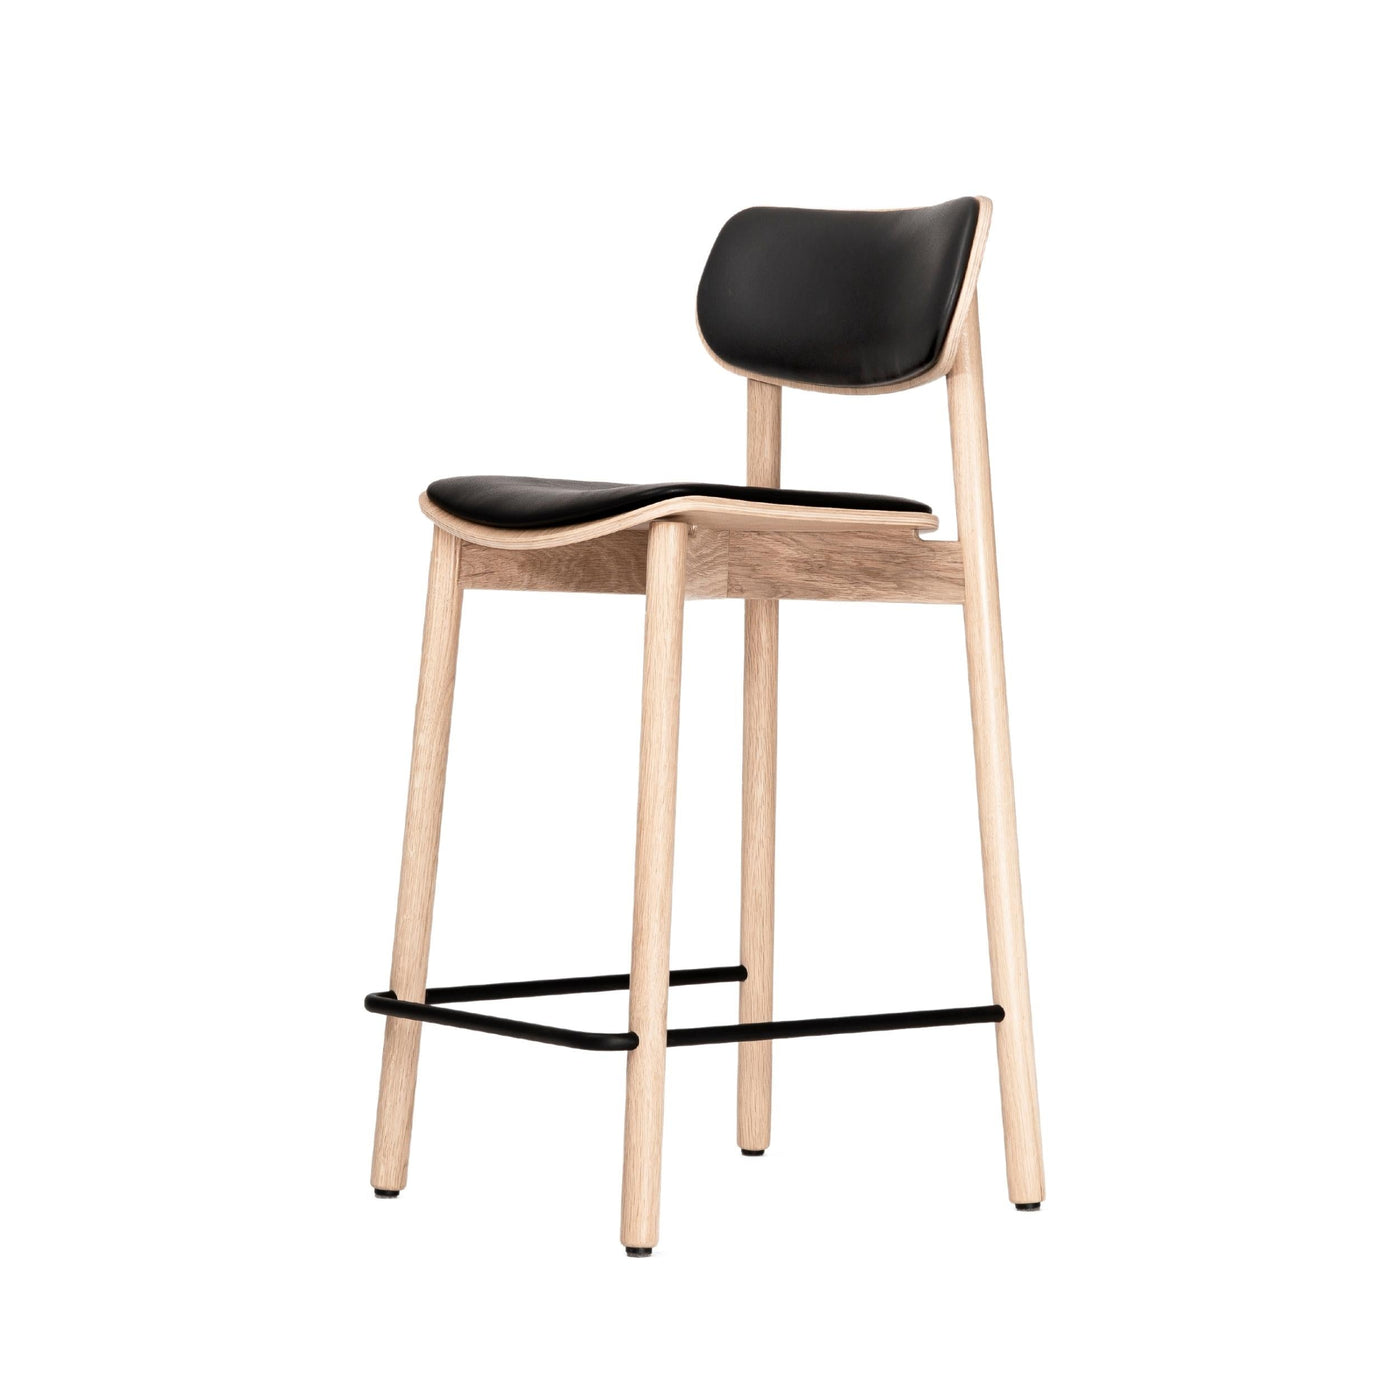 John Green Counter Stool Upholstered. British design at someday designs. Free UK delivery. #seat-pad_black-leather